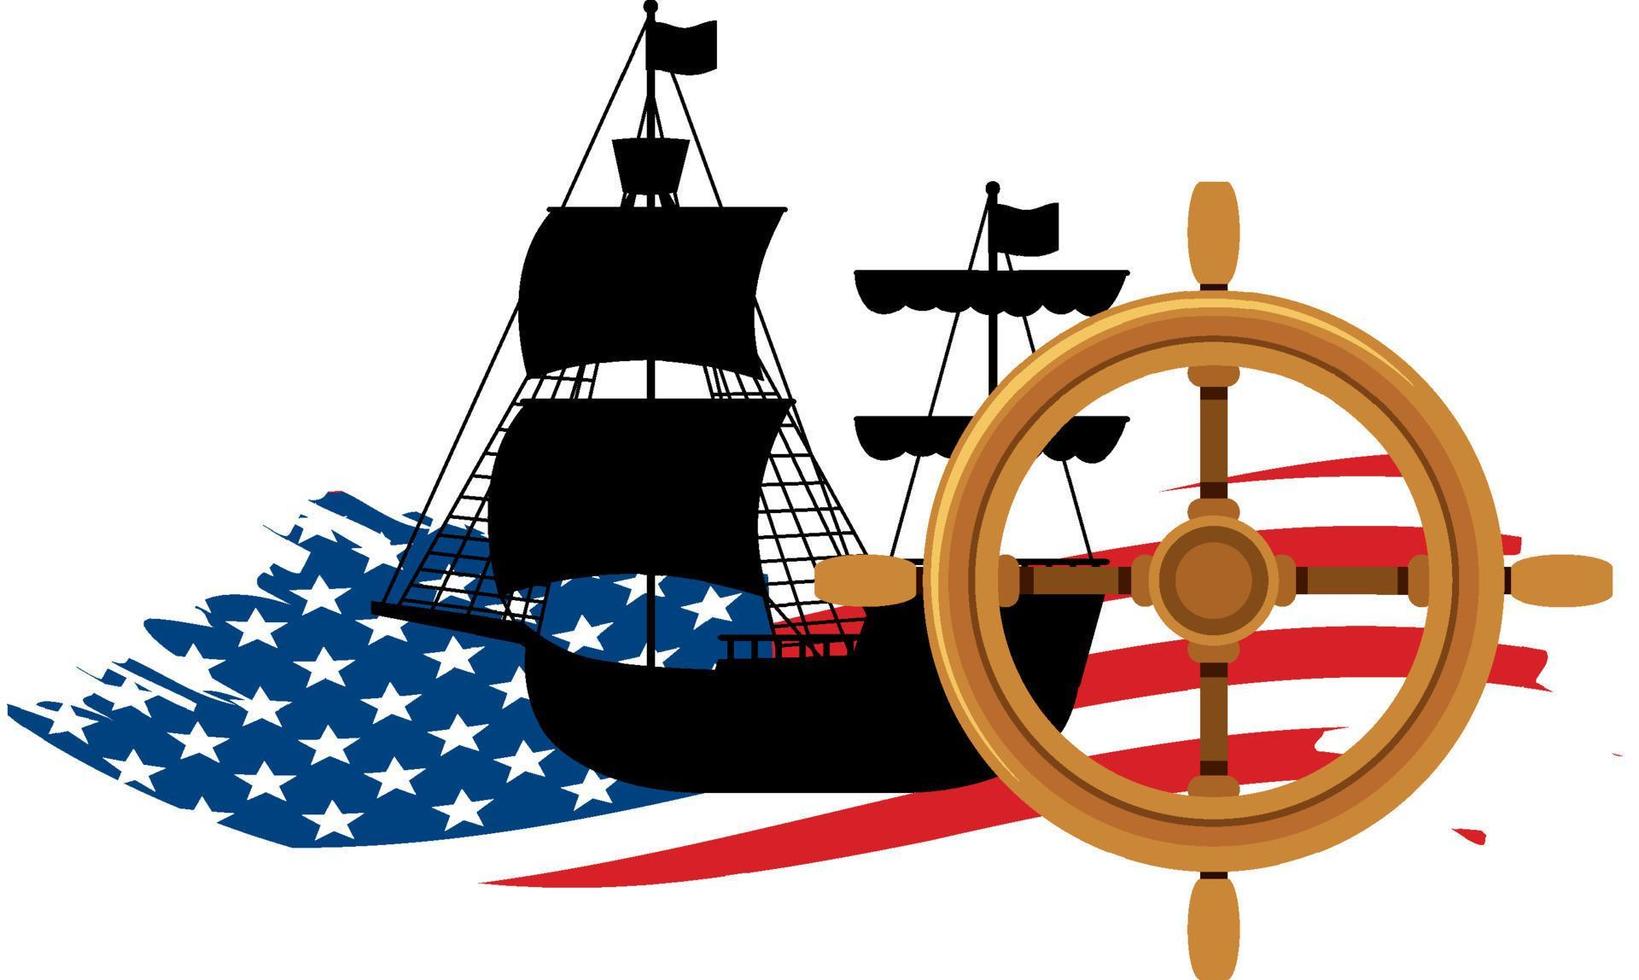 Christopher columbus ship silhouette with flag of United States vector